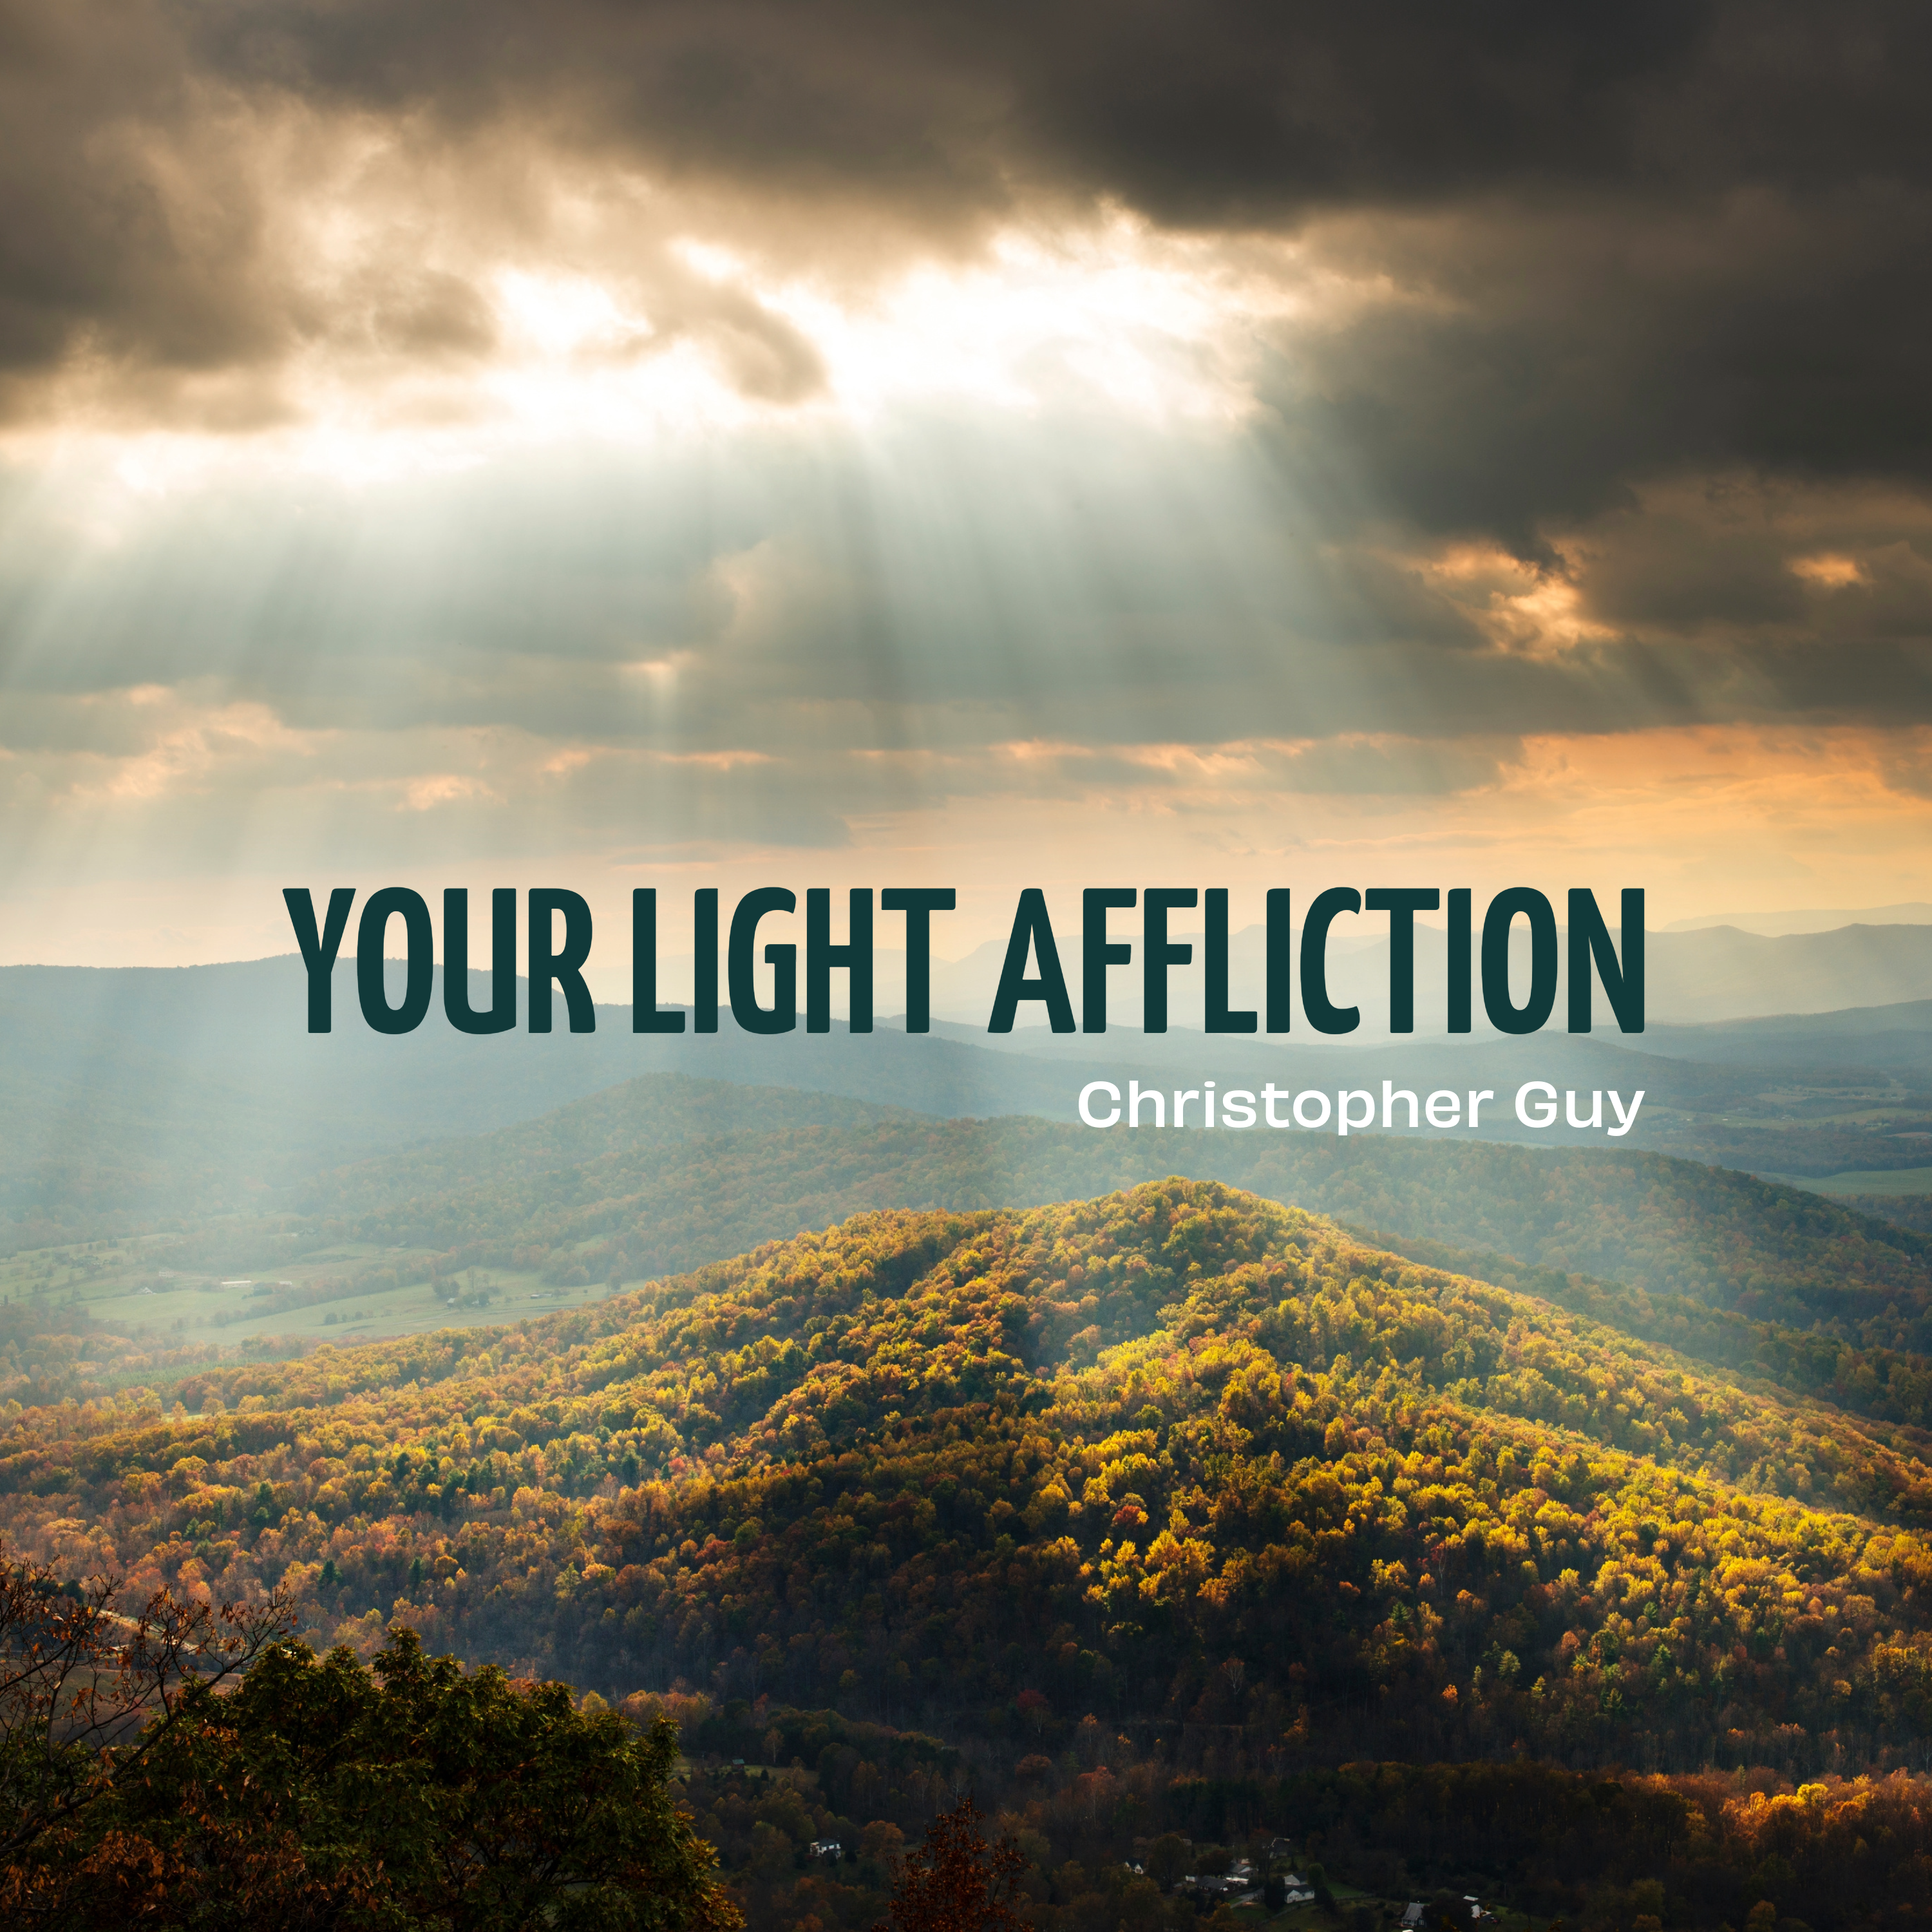 Your Light Affliction